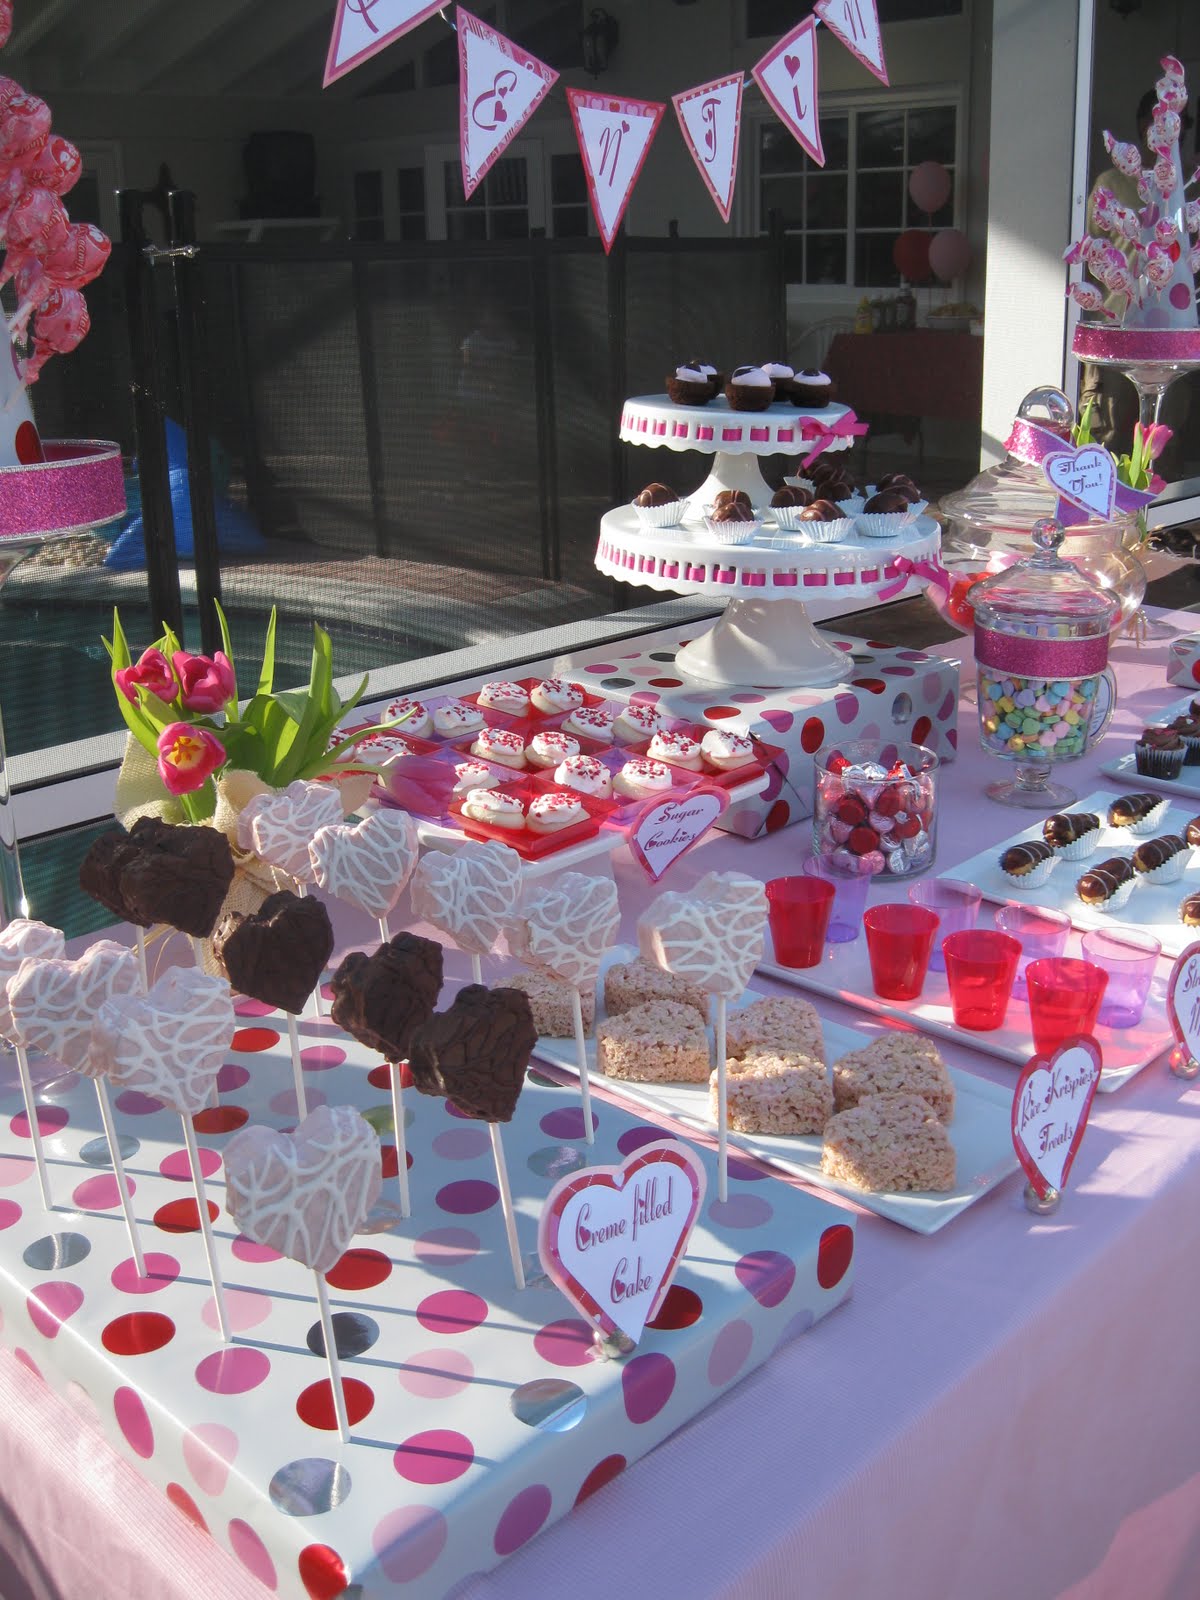 The Treat Table: April 2011